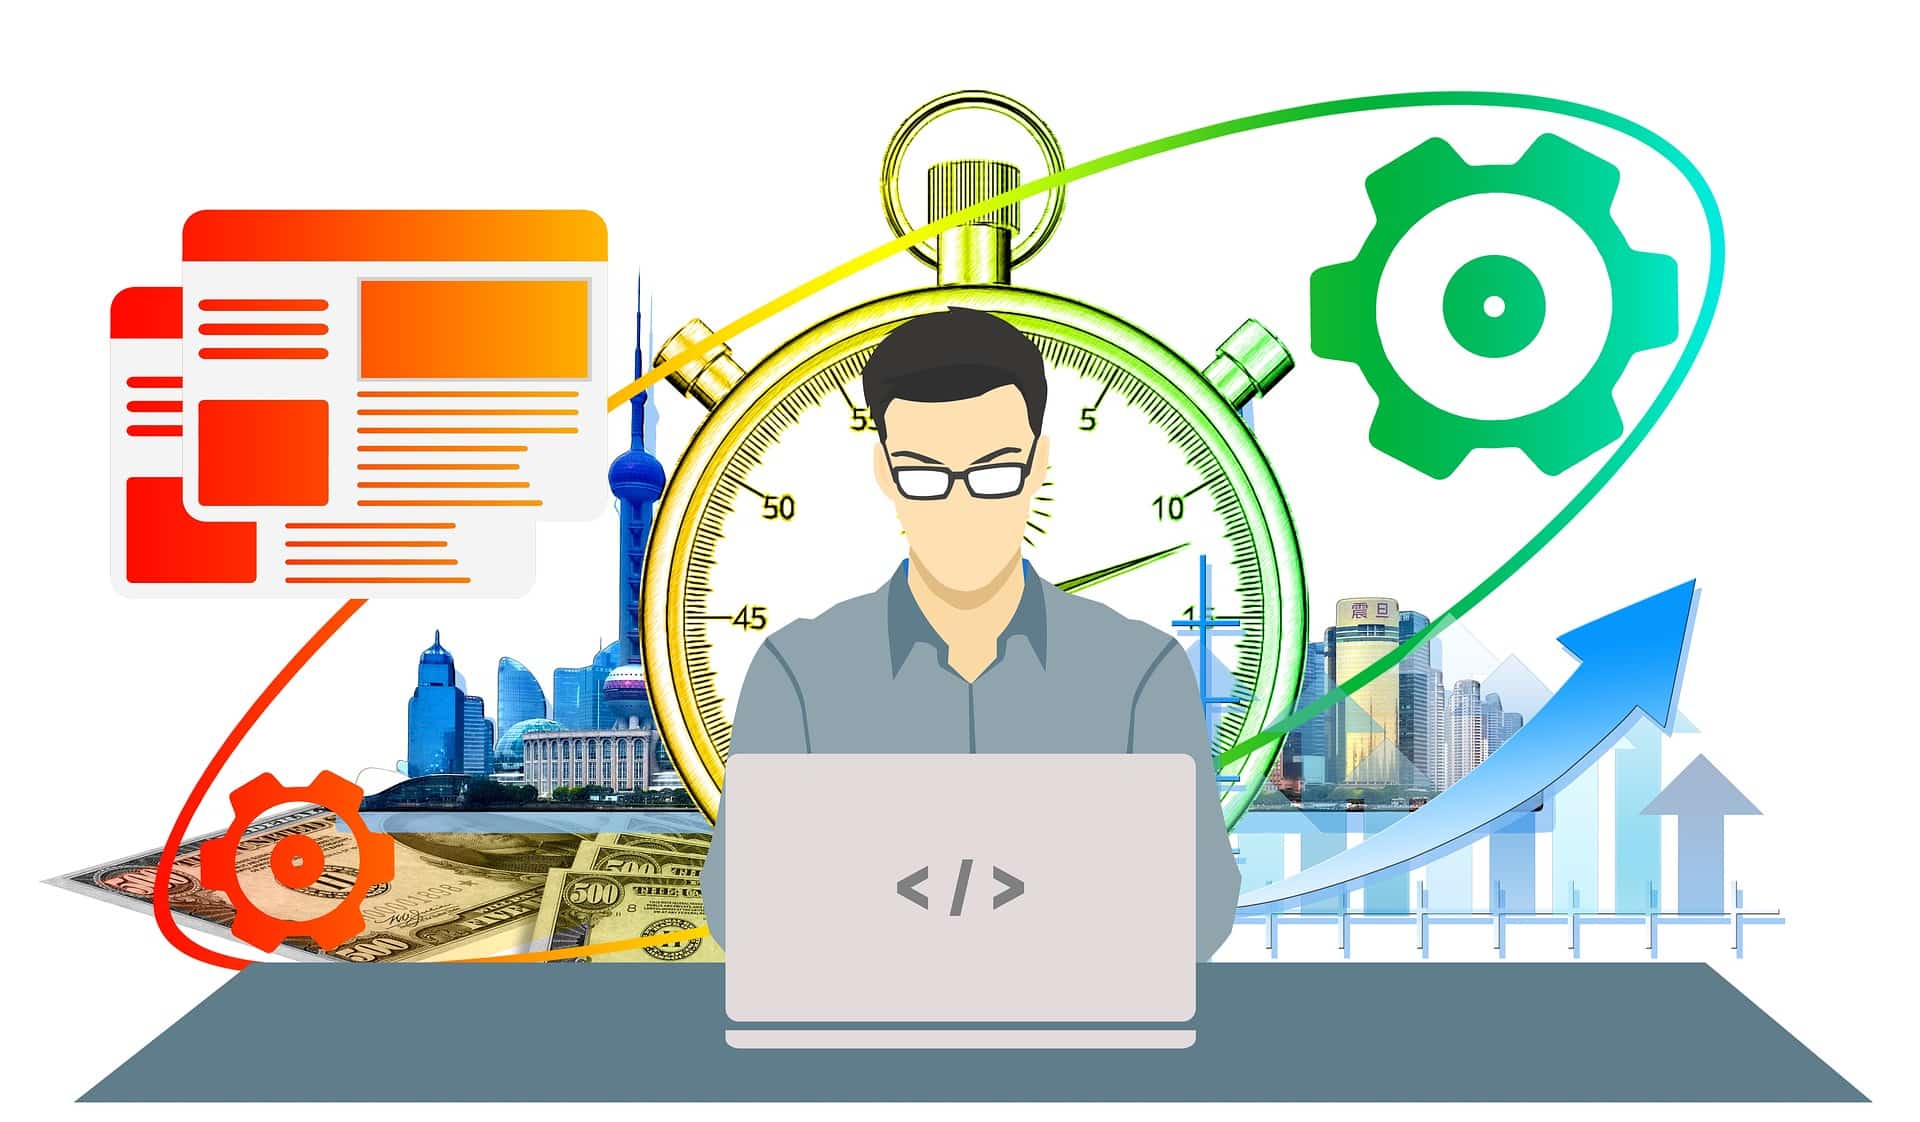 Animated image of a man working behind a computer with symbols meant to represent productivity.